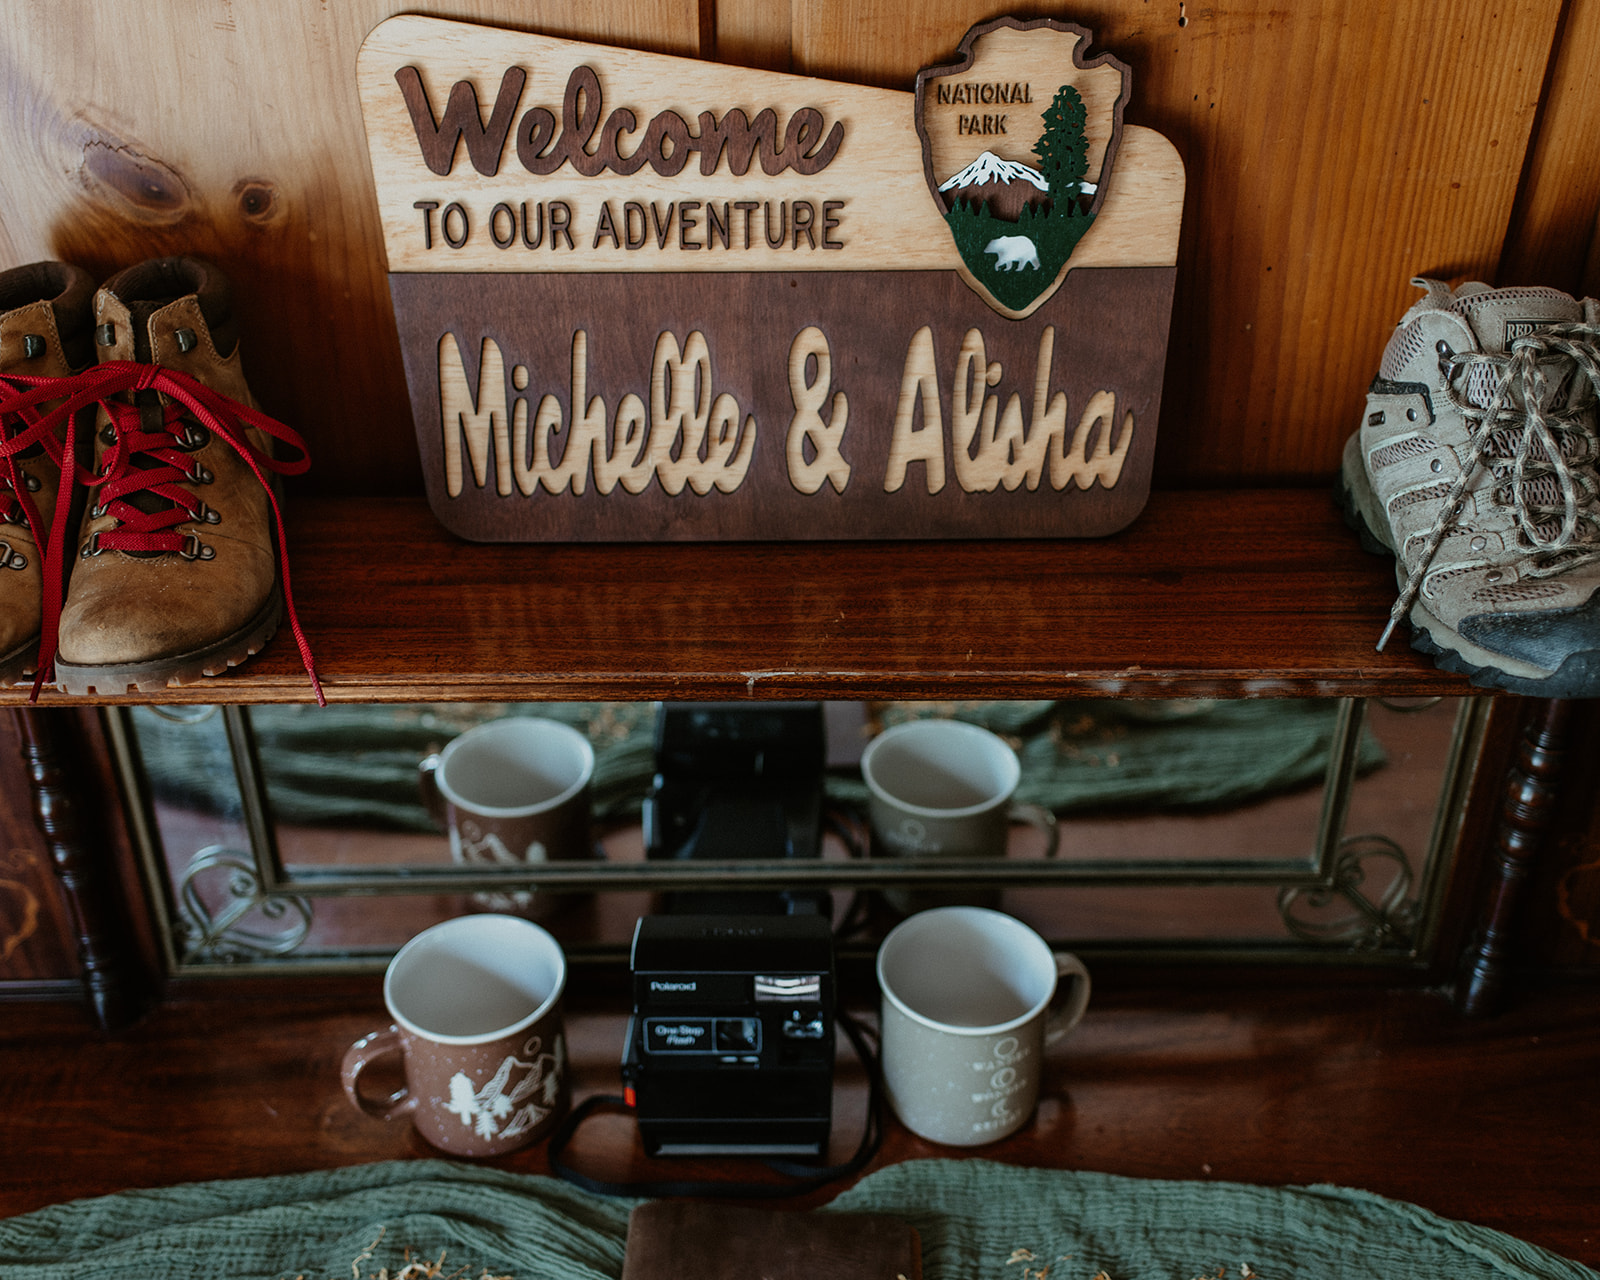 Detail photo of hiking books and couple's name on sign for New Hampshire Elopement